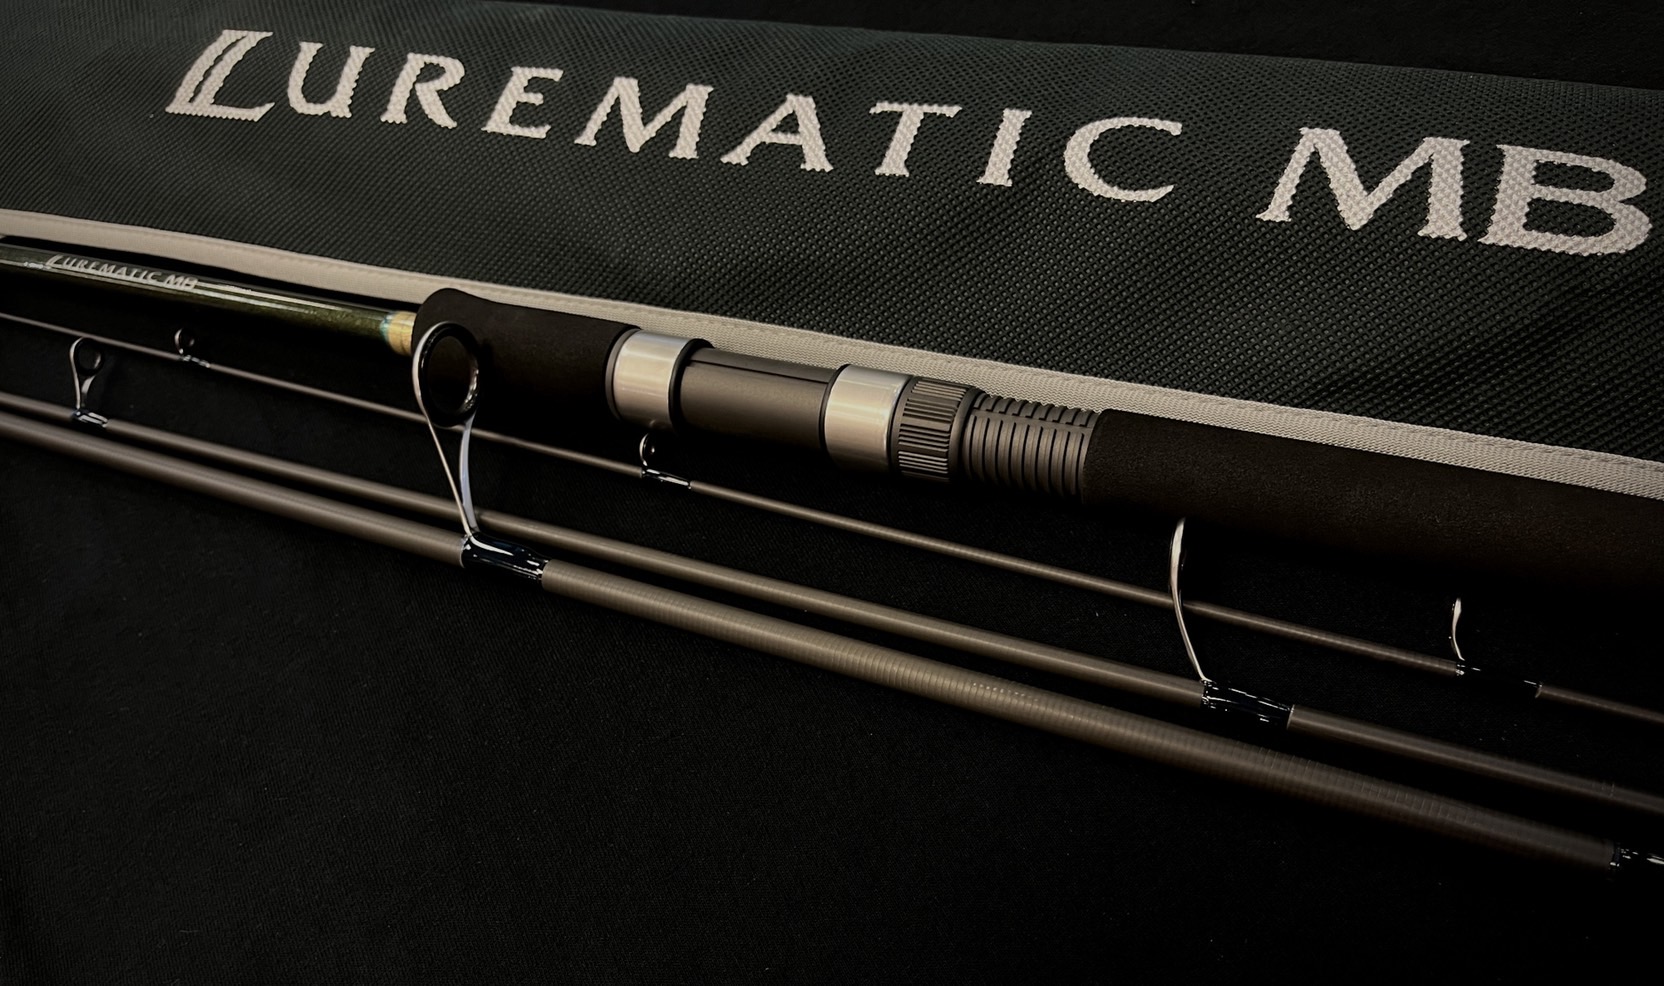 NEW ROD SHIMANO LUREMATIC MB S80L-4